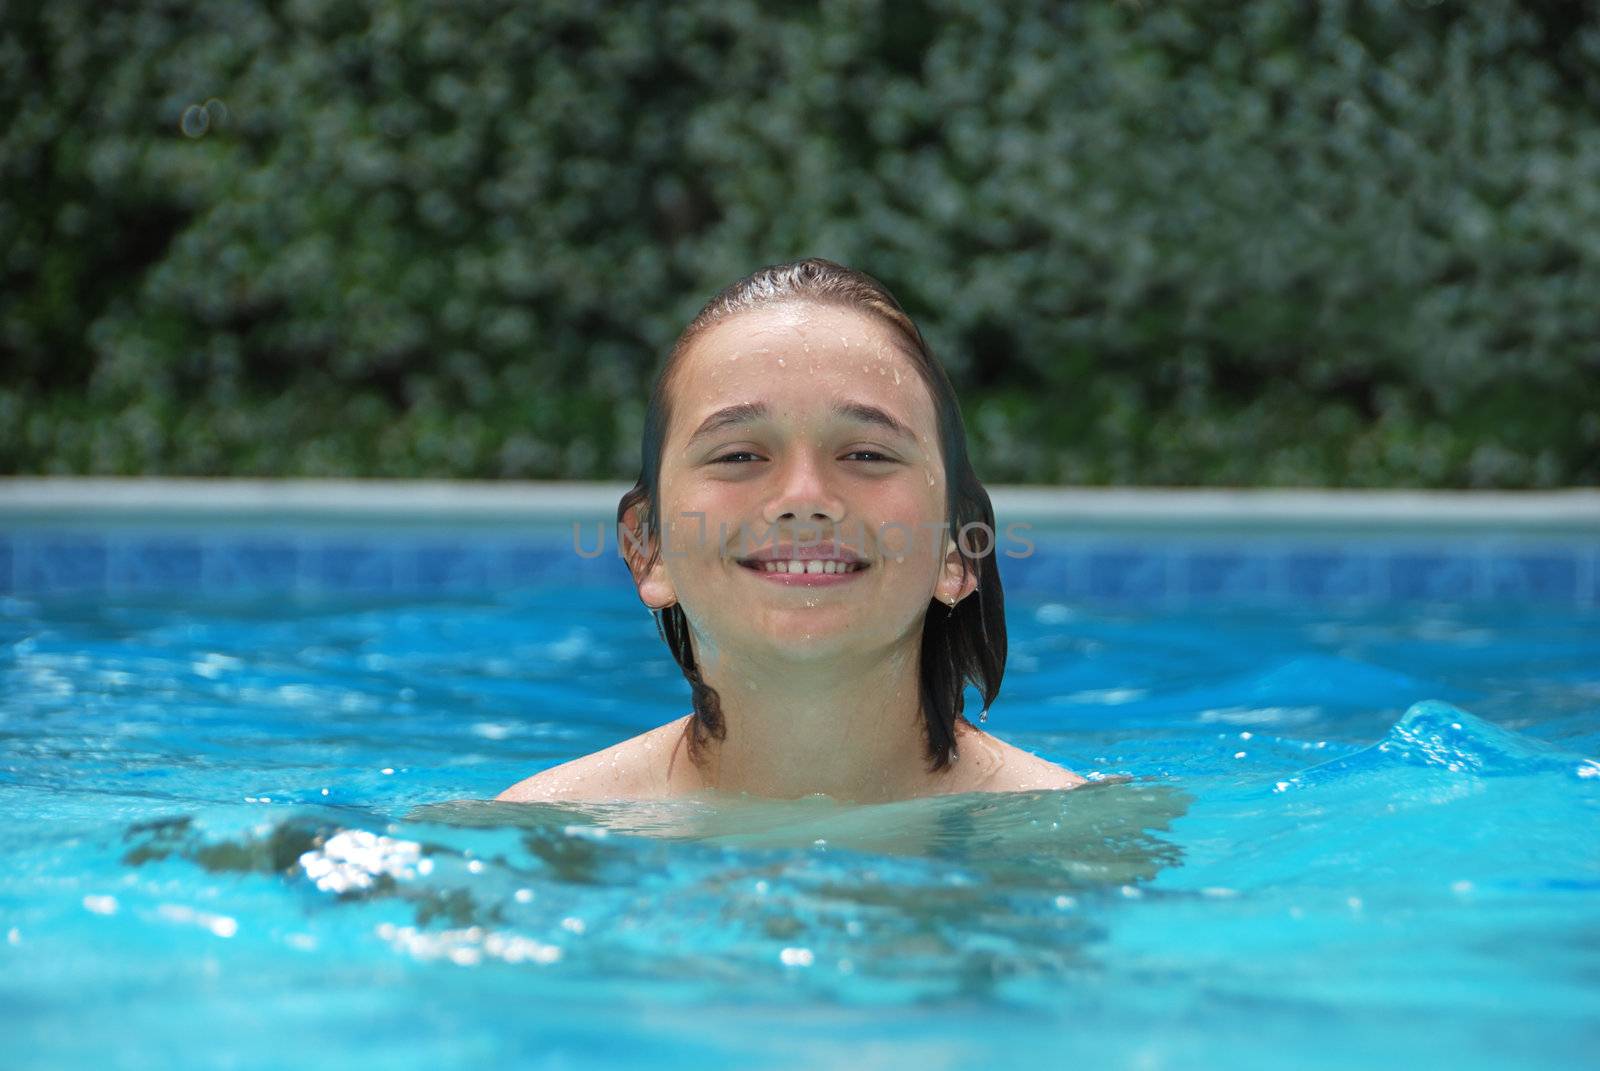 Smiling teen boy in swimming pool surrounded with white flower bushes in the background.